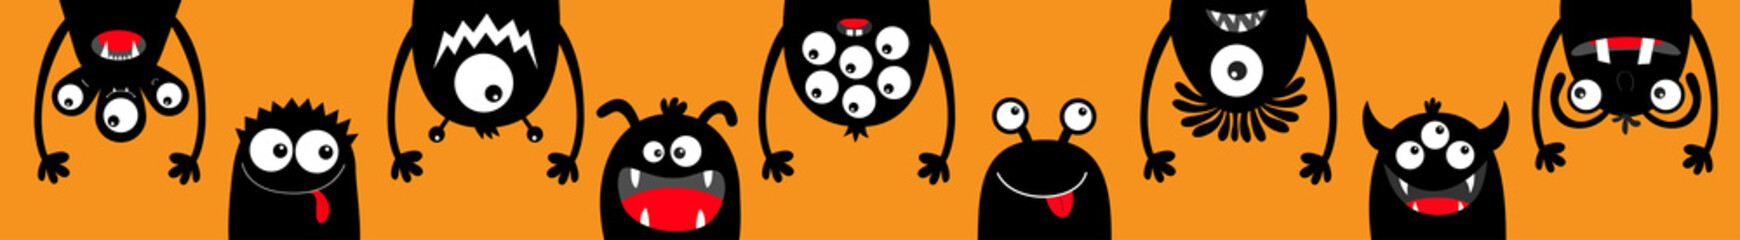 Happy Halloween. Hanging monster black silhouette head face icon set line. Eyes, tongue, tooth fang, hands up. Cute cartoon kawaii scary funny baby character. Orange background. Flat design.